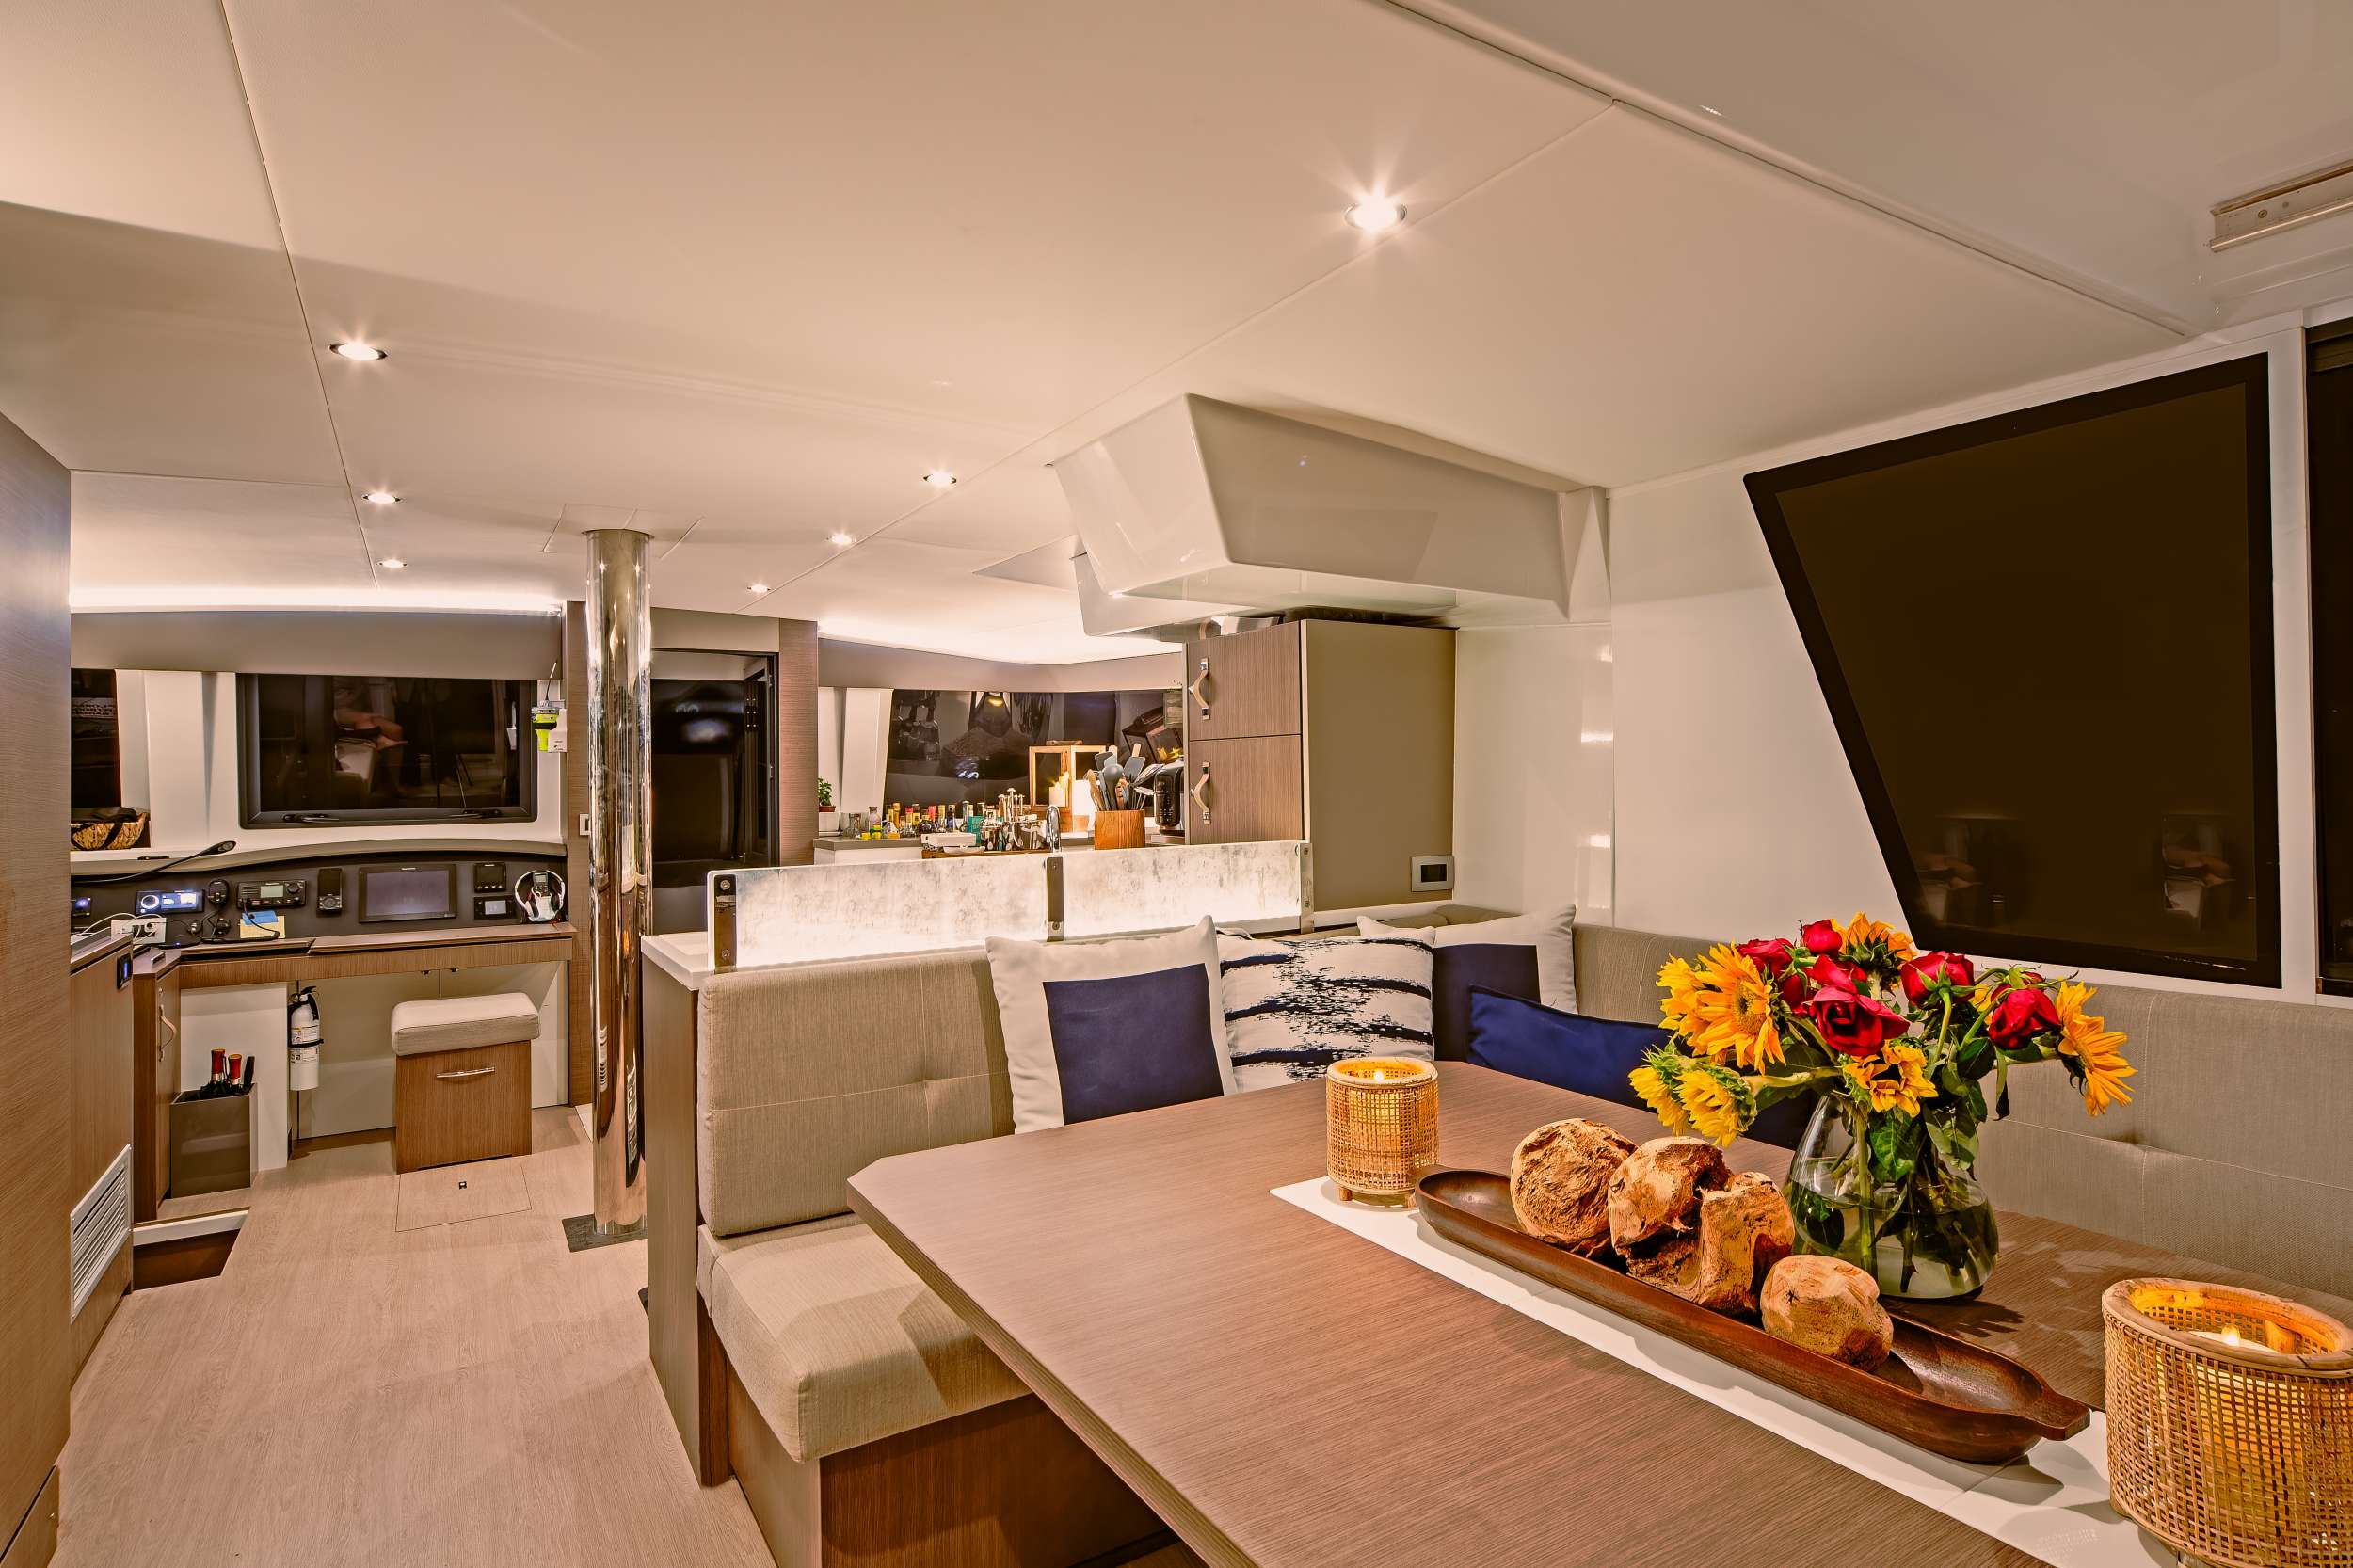 Canvas Yacht Charters